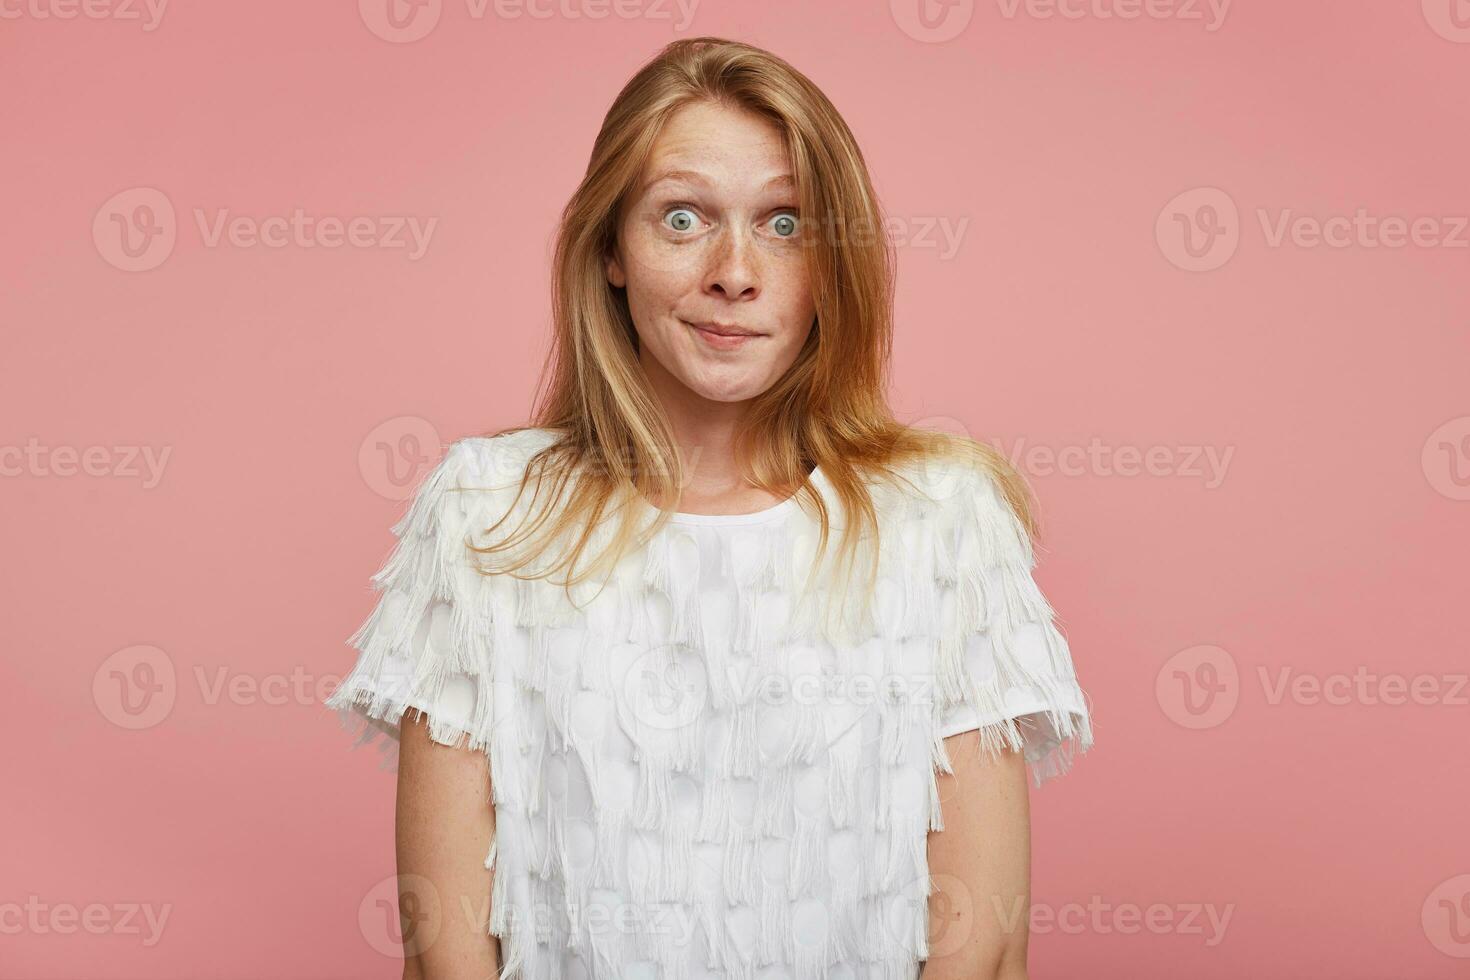 Amazed young pretty redhead woman with casual hairstyle rounding her green-gray eyes while looking surprisedly to camera, isolated over pink background with hands down photo